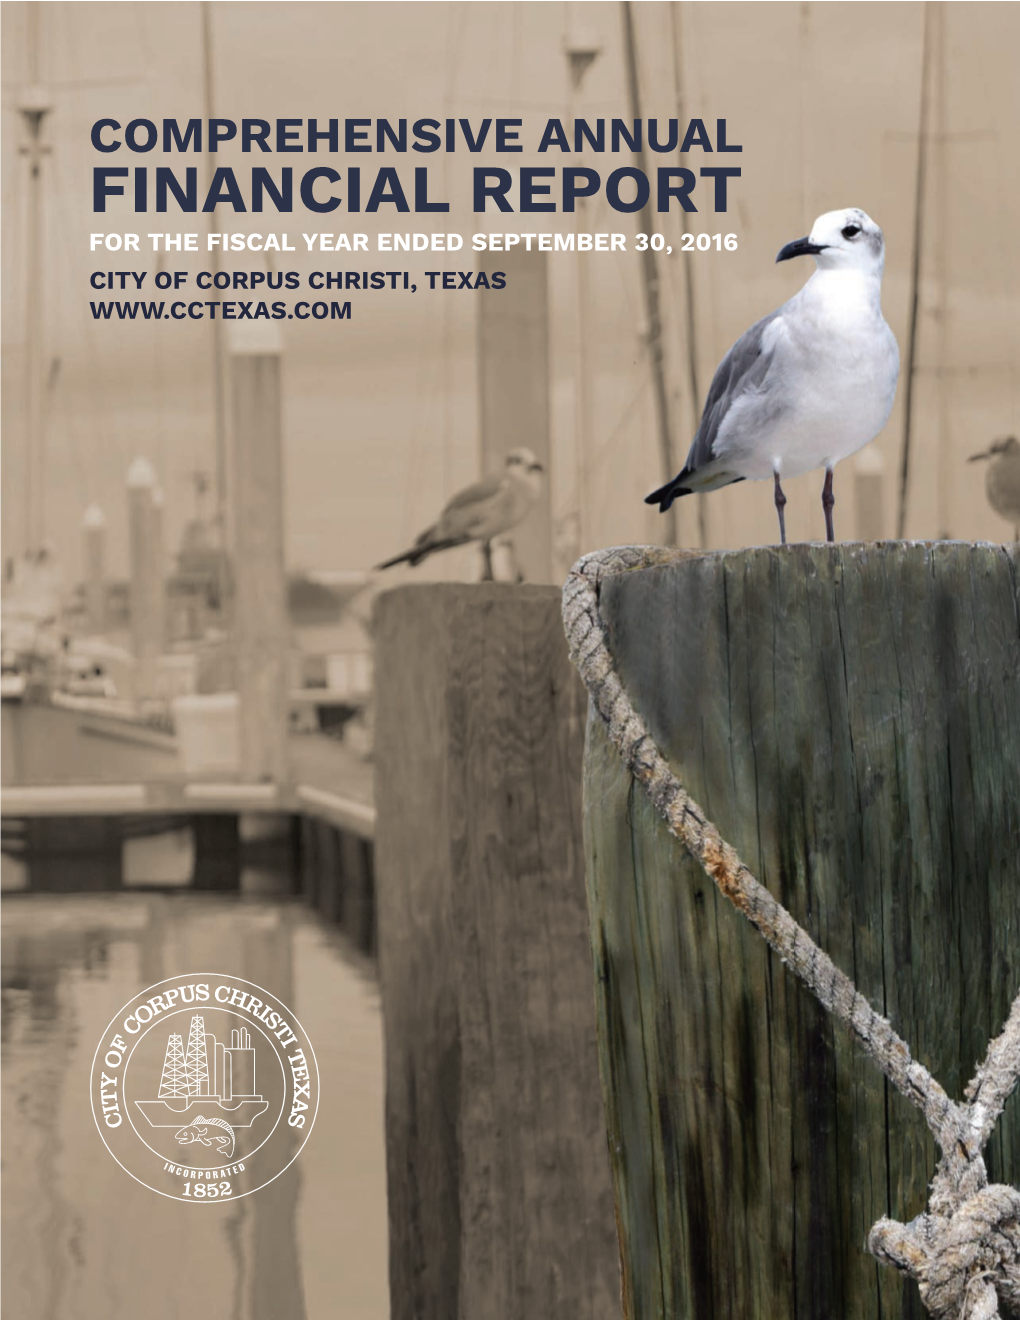 Financial Report for the Fiscal Year Ended September 30, 2016 City of Corpus Christi, Texas City of Corpus Christi, Texas